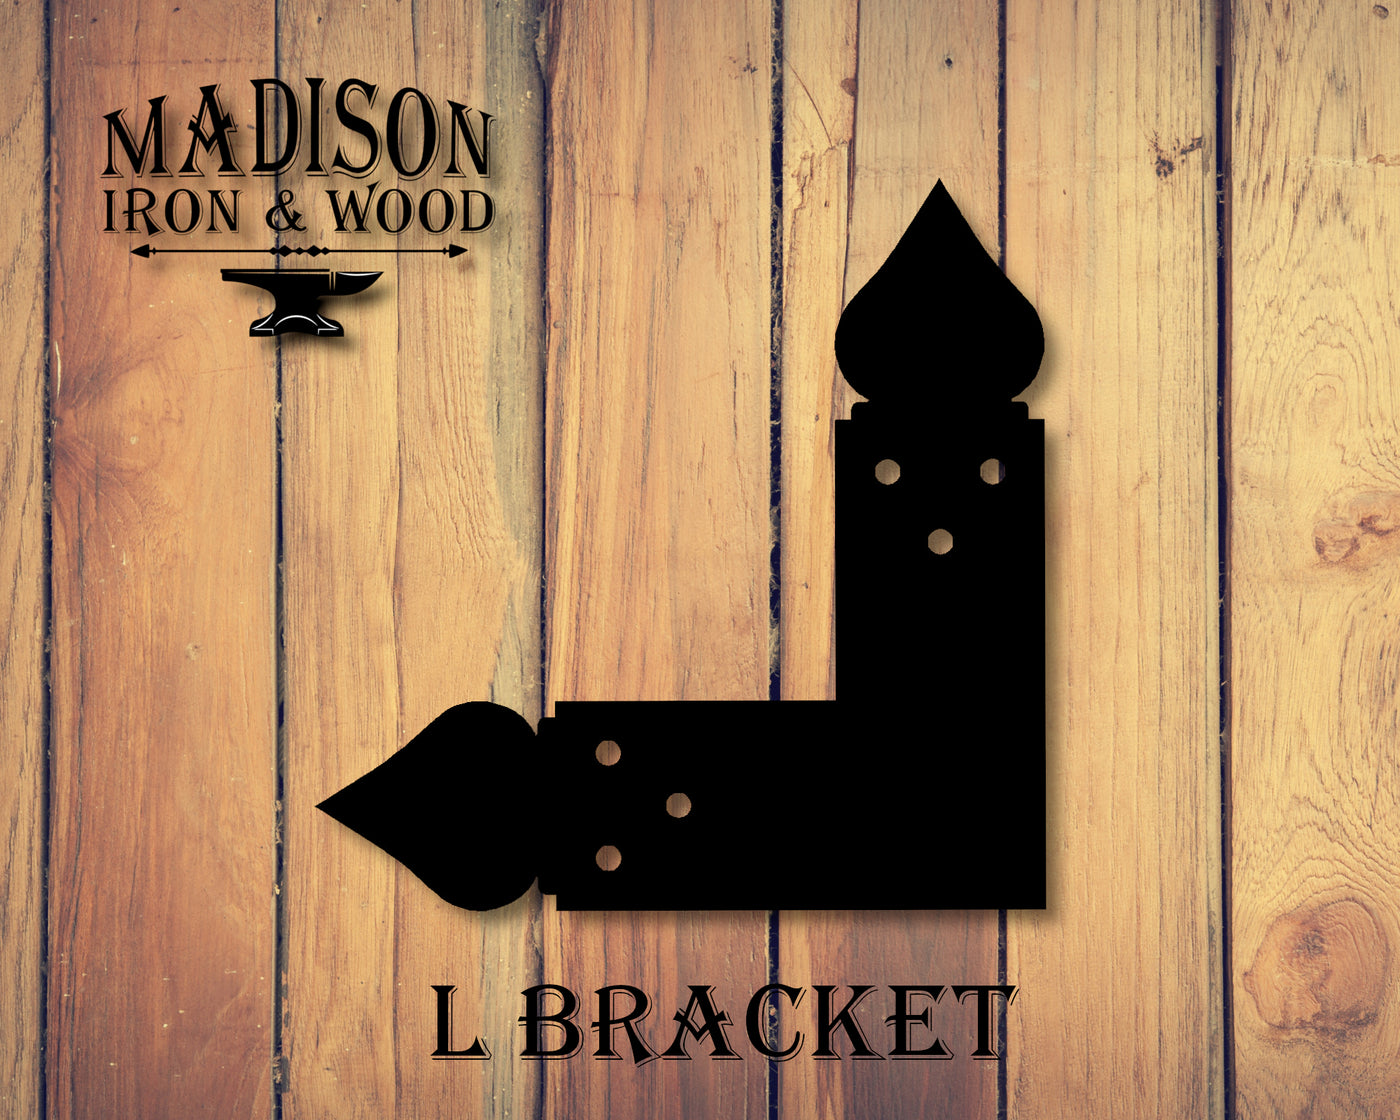 Spade Brackets For 4x4 Dimensional Lumber - Madison Iron and Wood - Brackets - metal outdoor decor - Steel deocrations - american made products - veteran owned business products - fencing decorations - fencing supplies - custom wall decorations - personalized wall signs - steel - decorative post caps - steel post caps - metal post caps - brackets - structural brackets - home improvement - easter - easter decorations - easter gift - easter yard decor